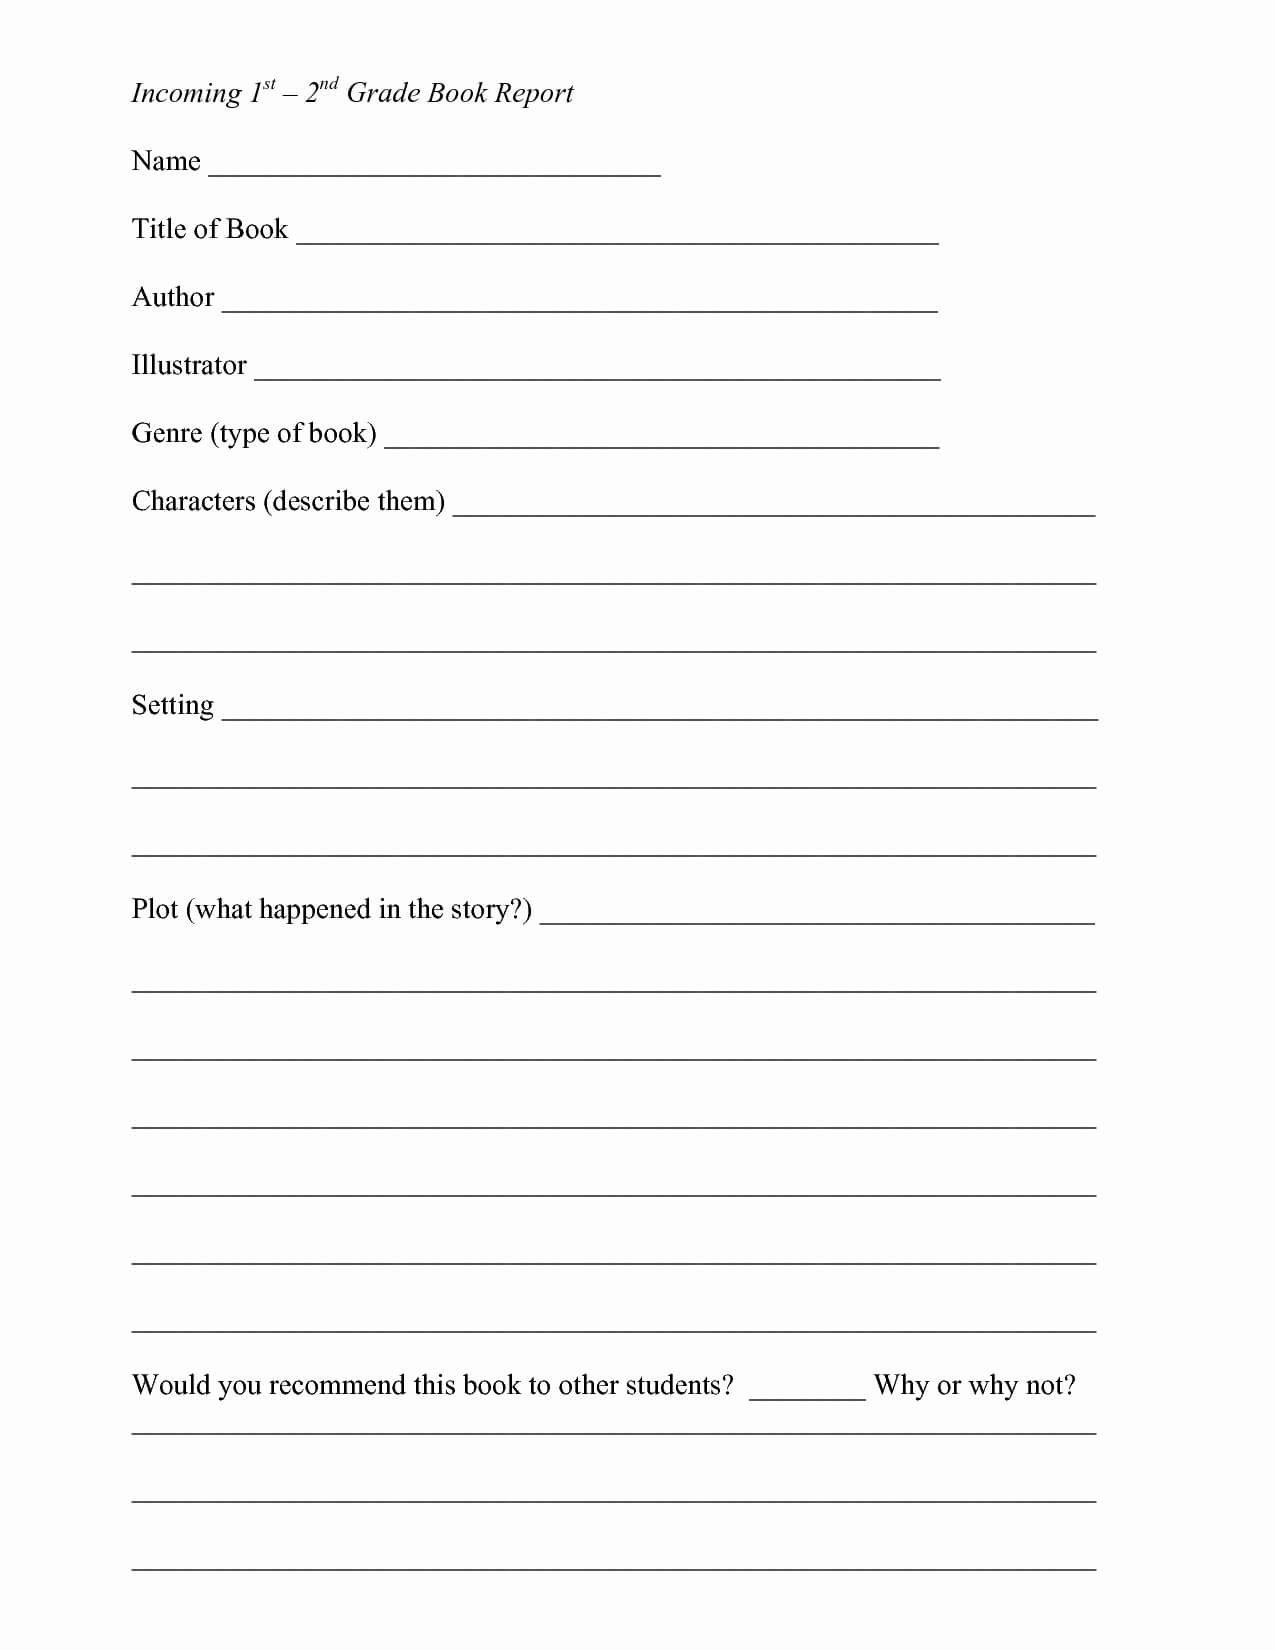 Fiction Book Report Template 6Th Grade For 7Th Graders Pdf With 6Th Grade Book Report Template